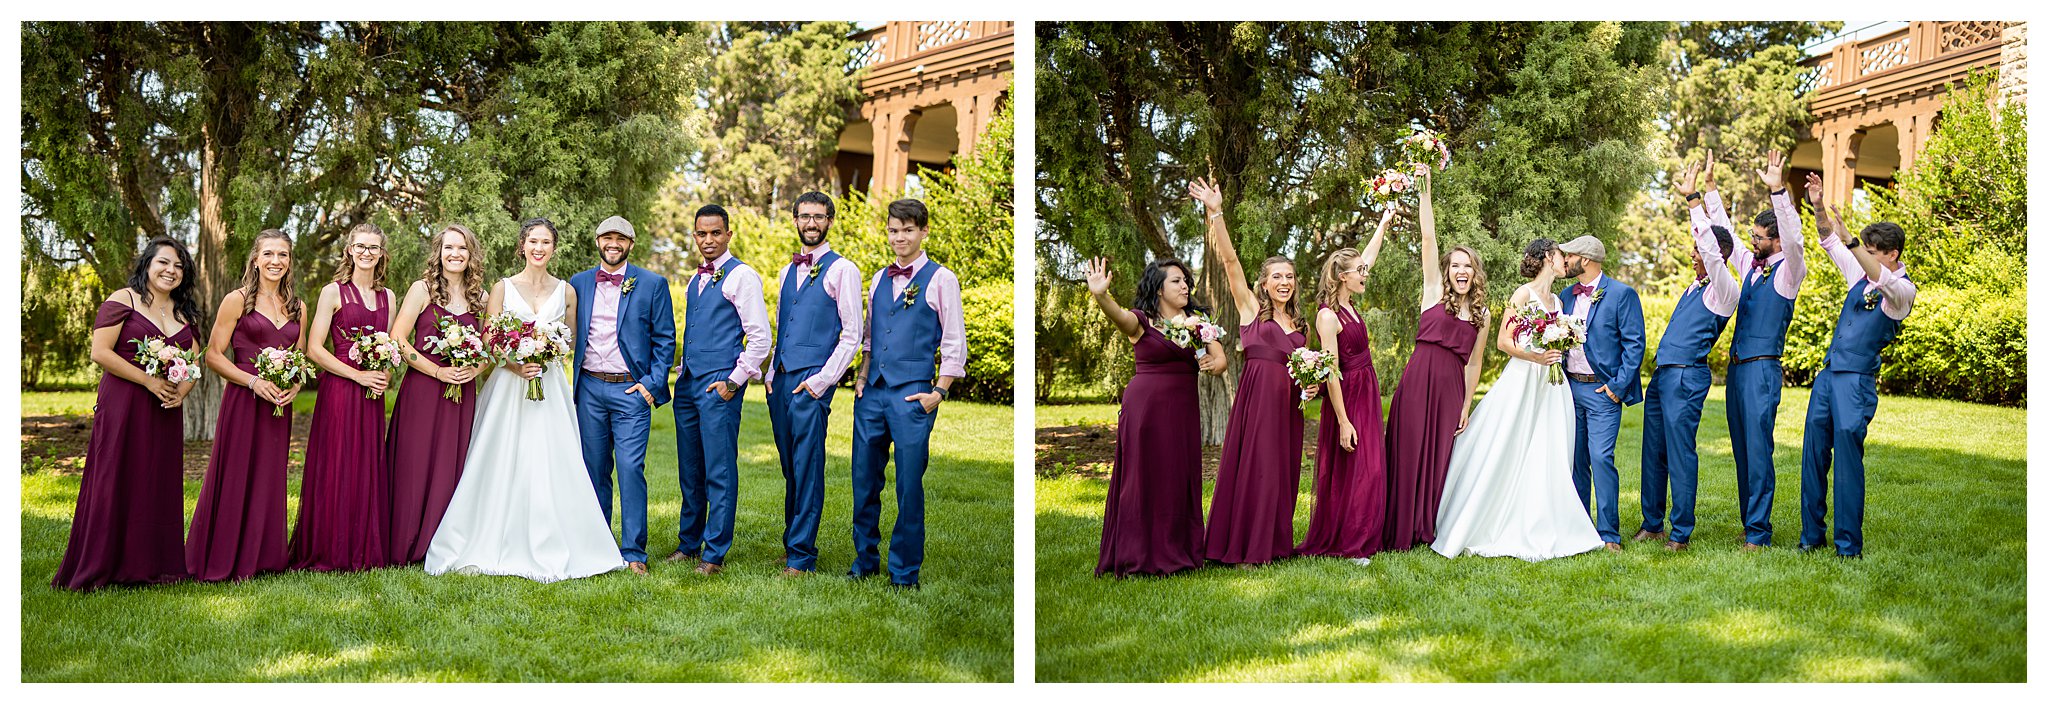 A bride and groom pose with their bridal party